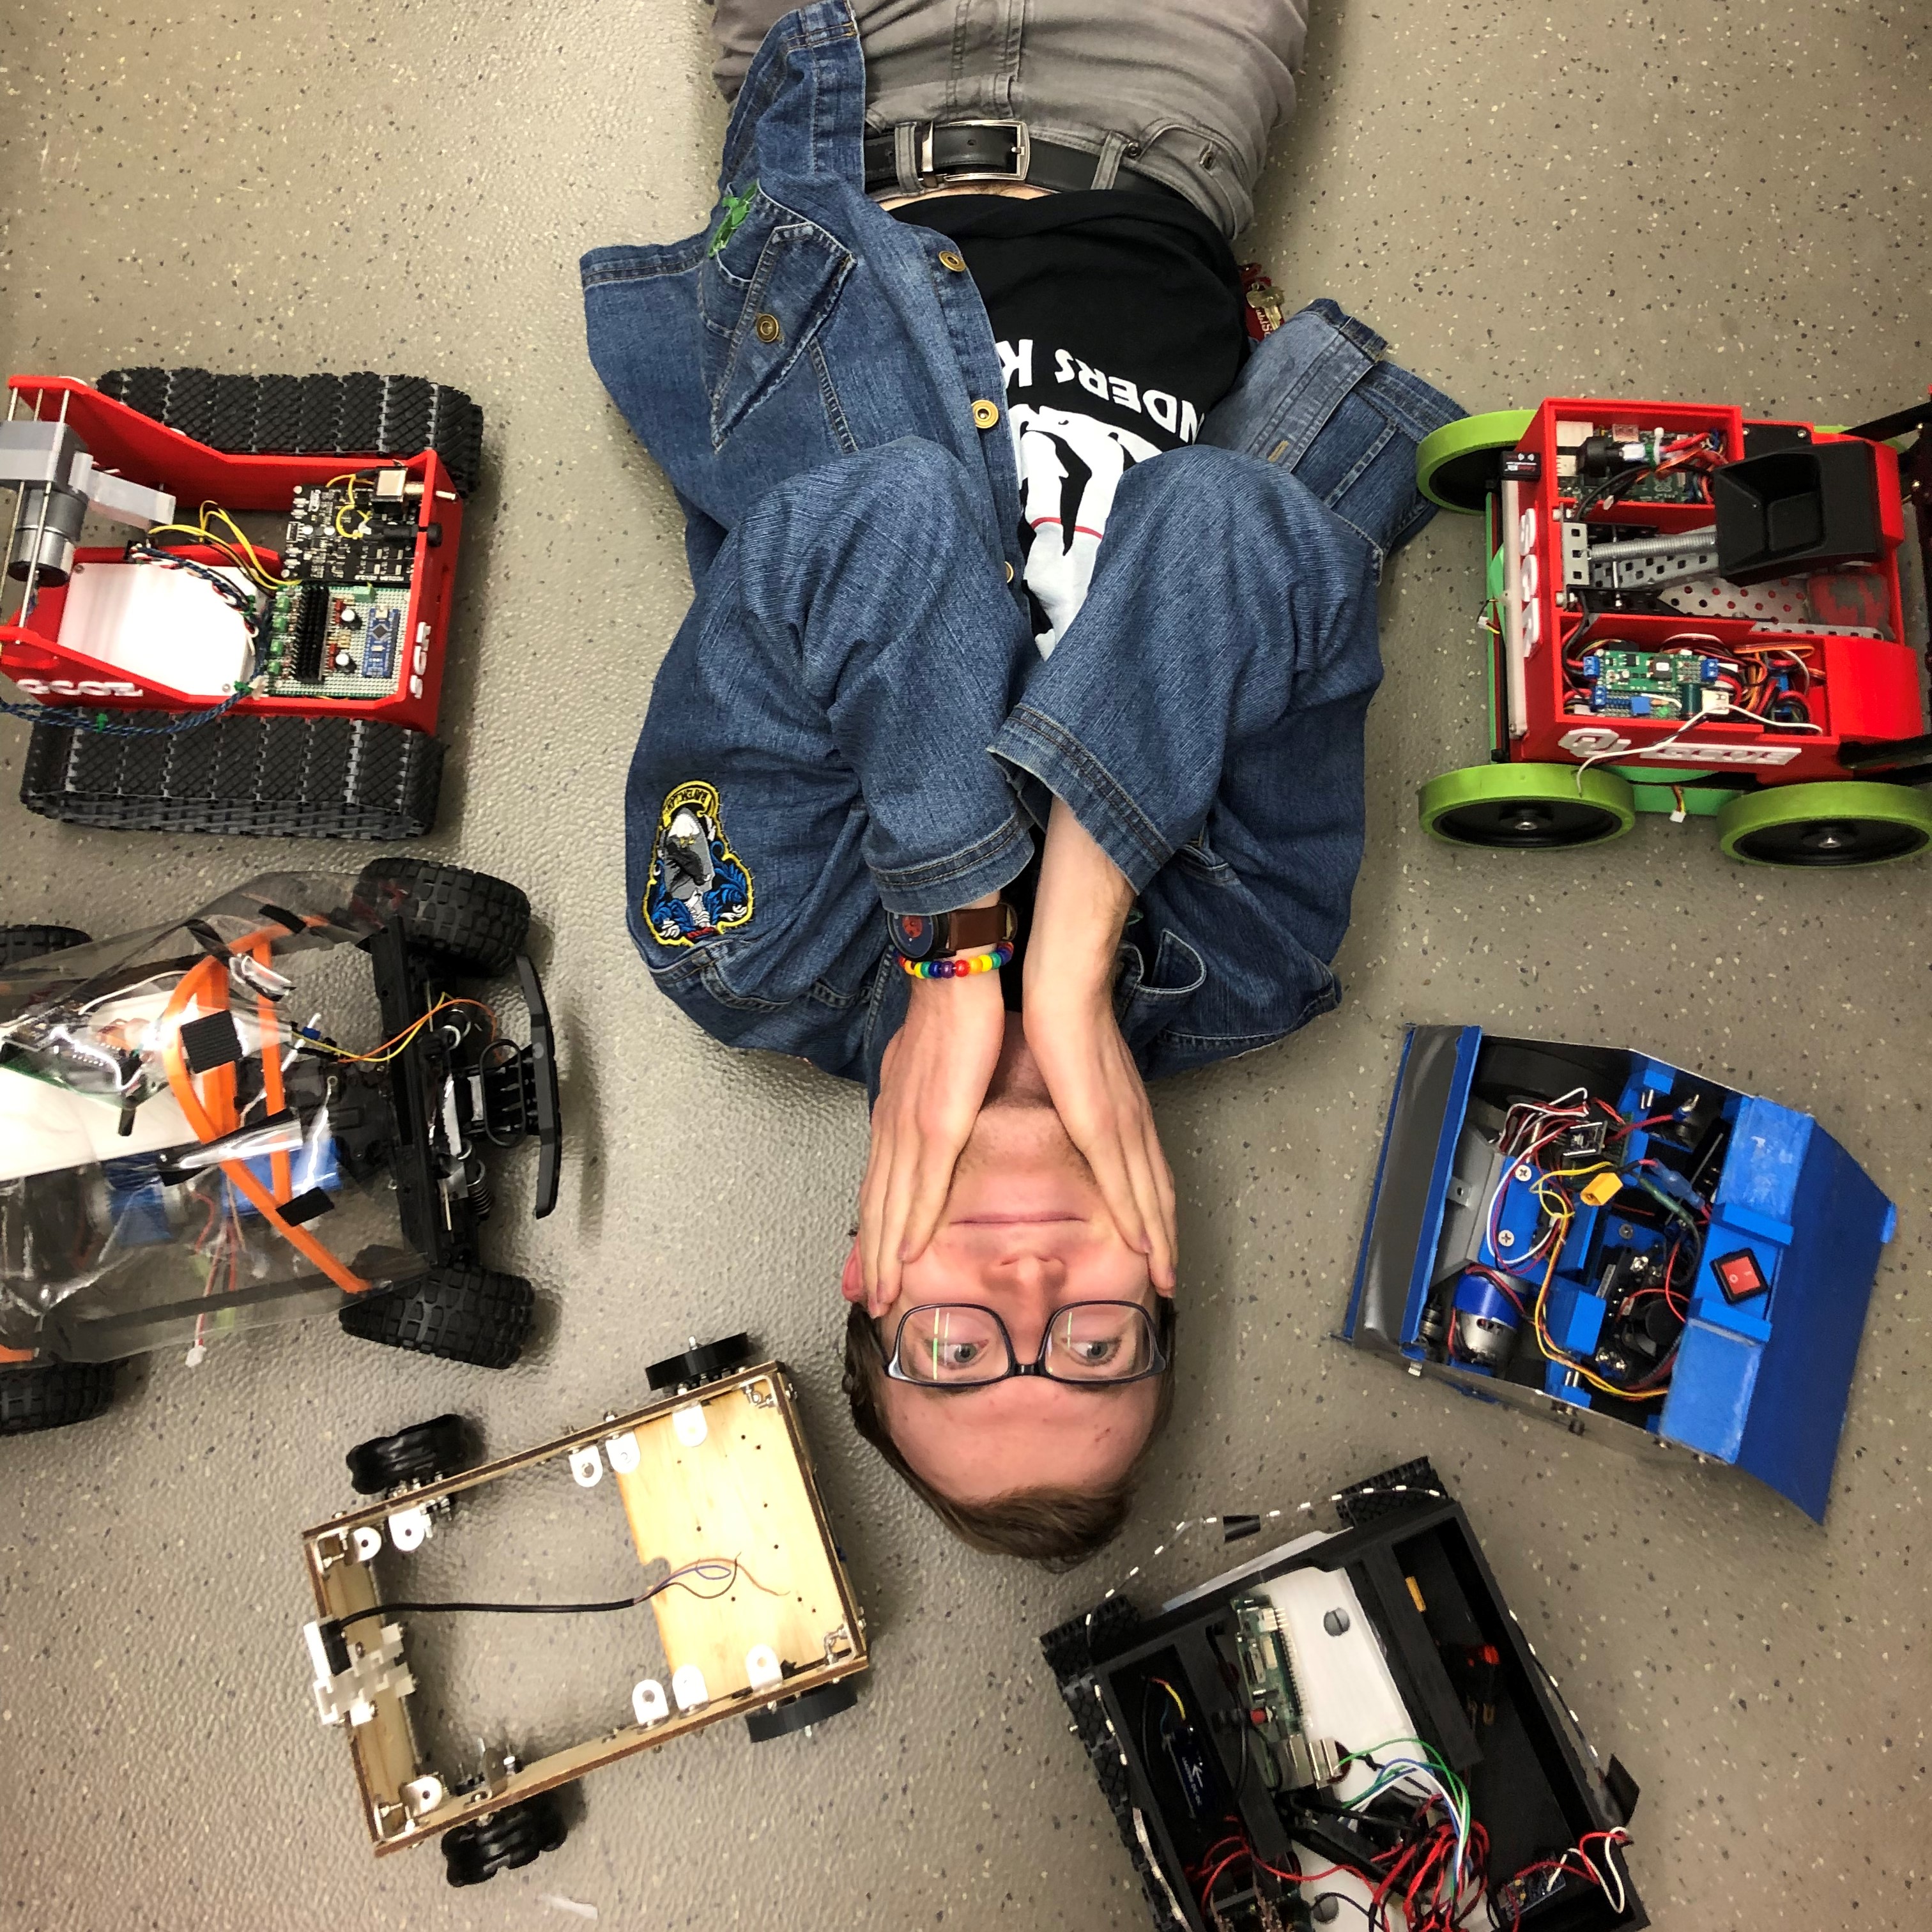 Kevin laying on the lab floor surrounded by small robots